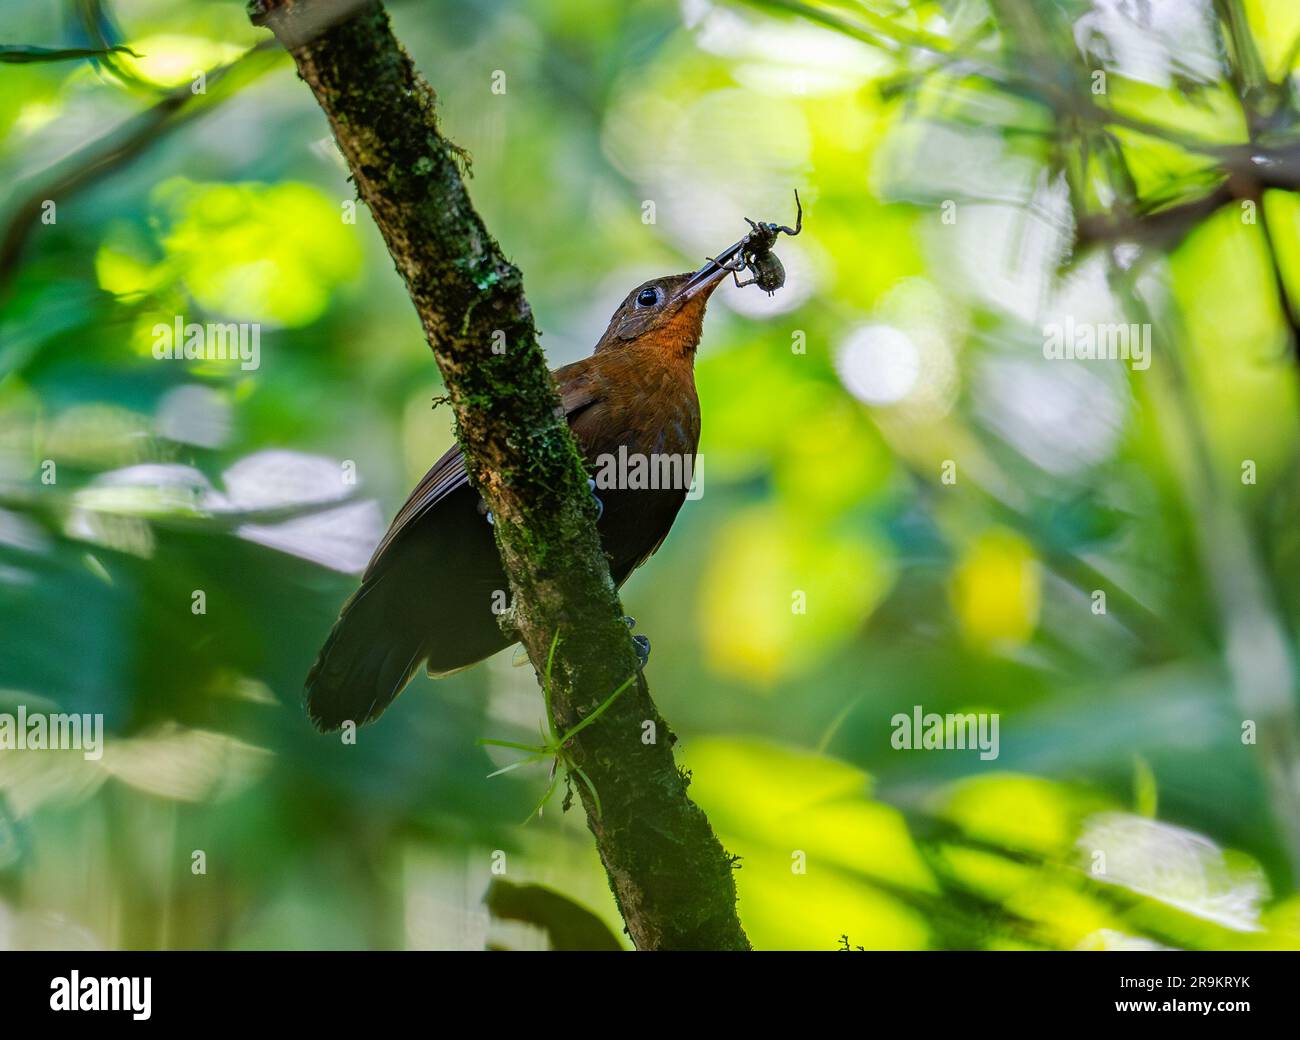 A South American Leaftosser (Sclerurus obscurior) with a spider in its beak. Colombia, South America. Stock Photo